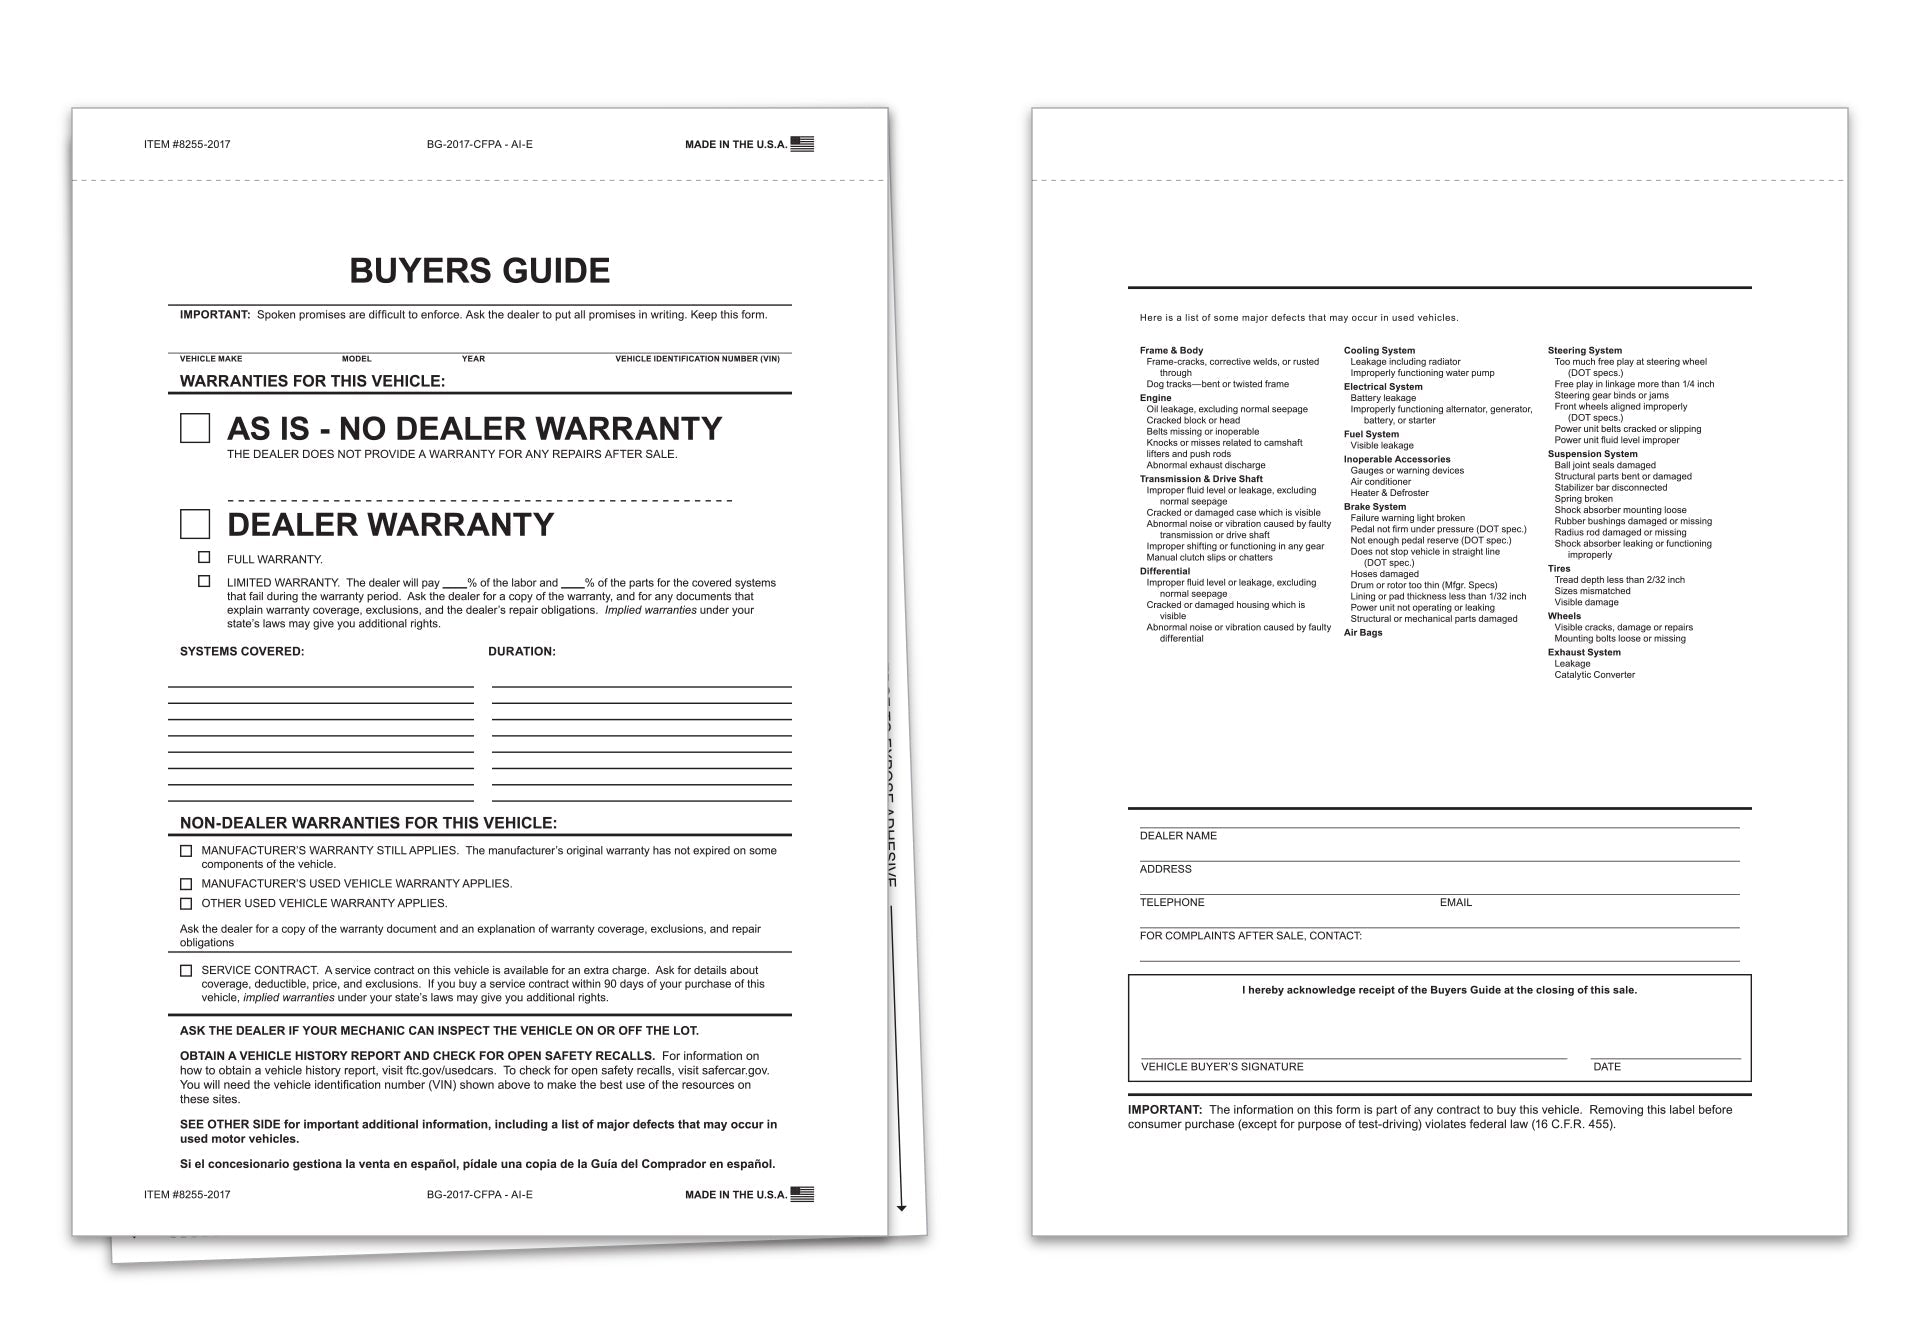 Interior Buyers Guide - BG-2017- As Is - 2 Part, Paper/PA